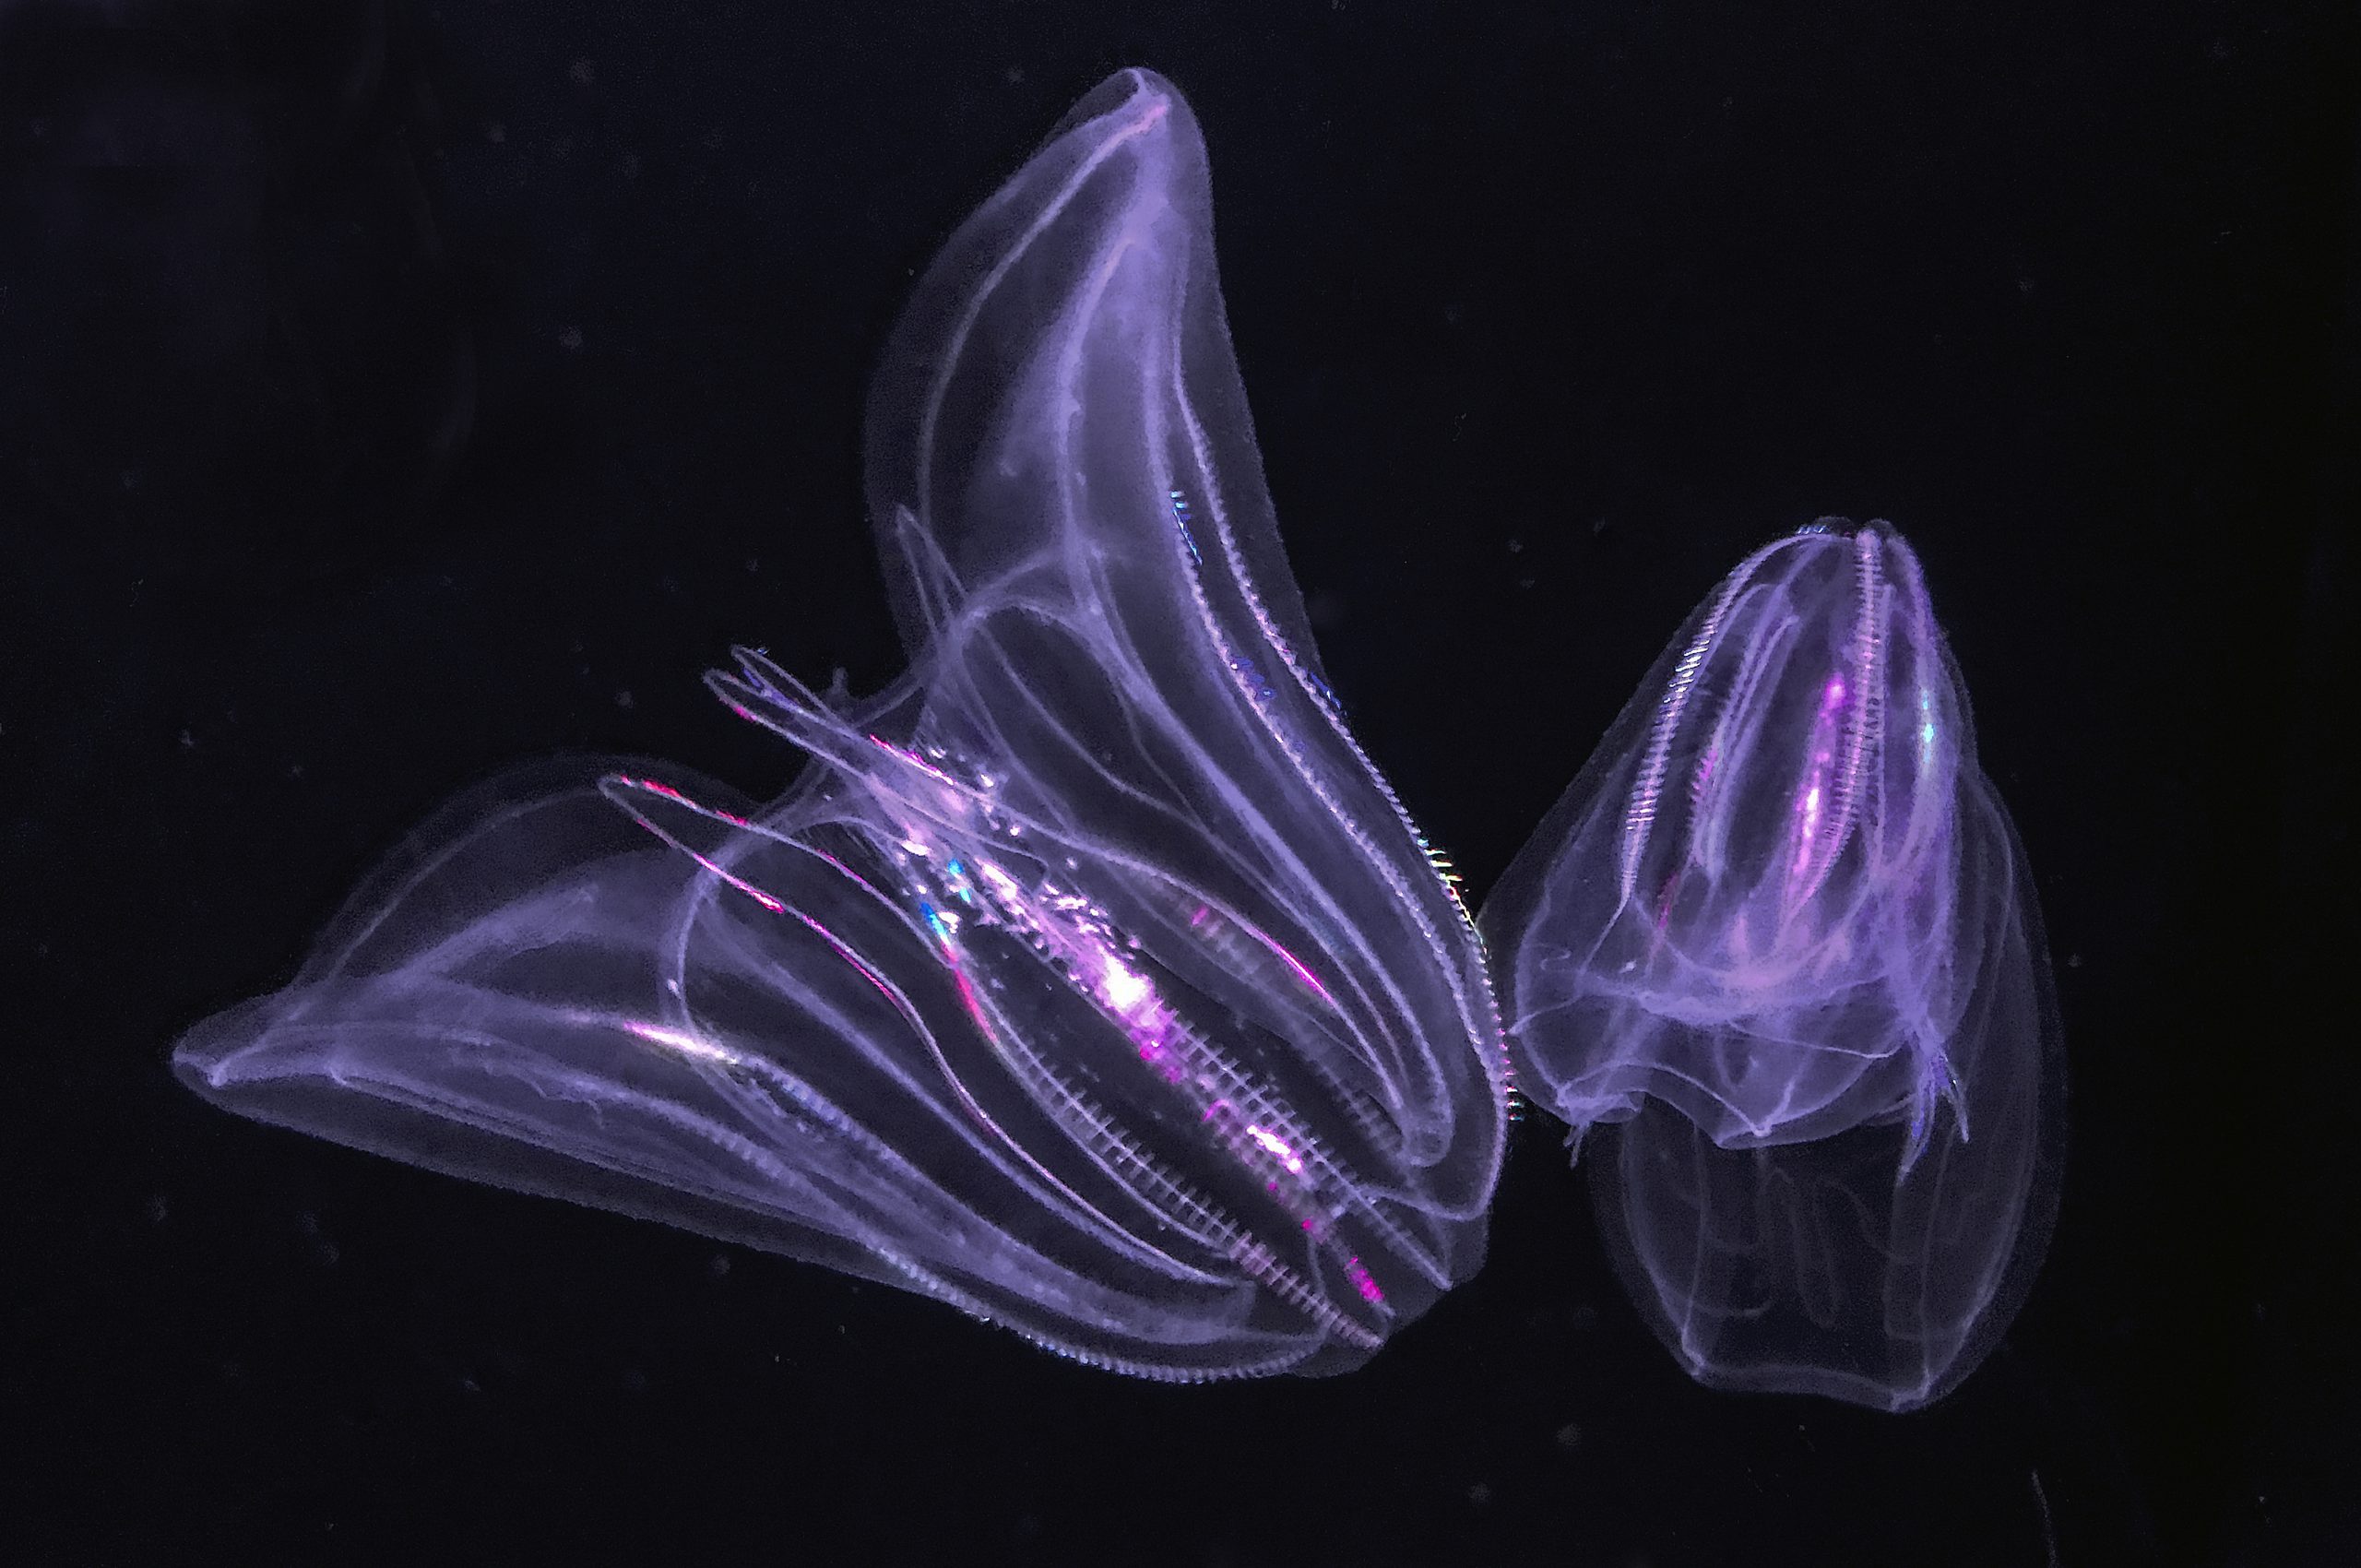 Comb jellies. Comb Jelly. Comb Jellies опасные ли они. Rabbit-eared Comb Jelly. Jellyfish species that Groups together.